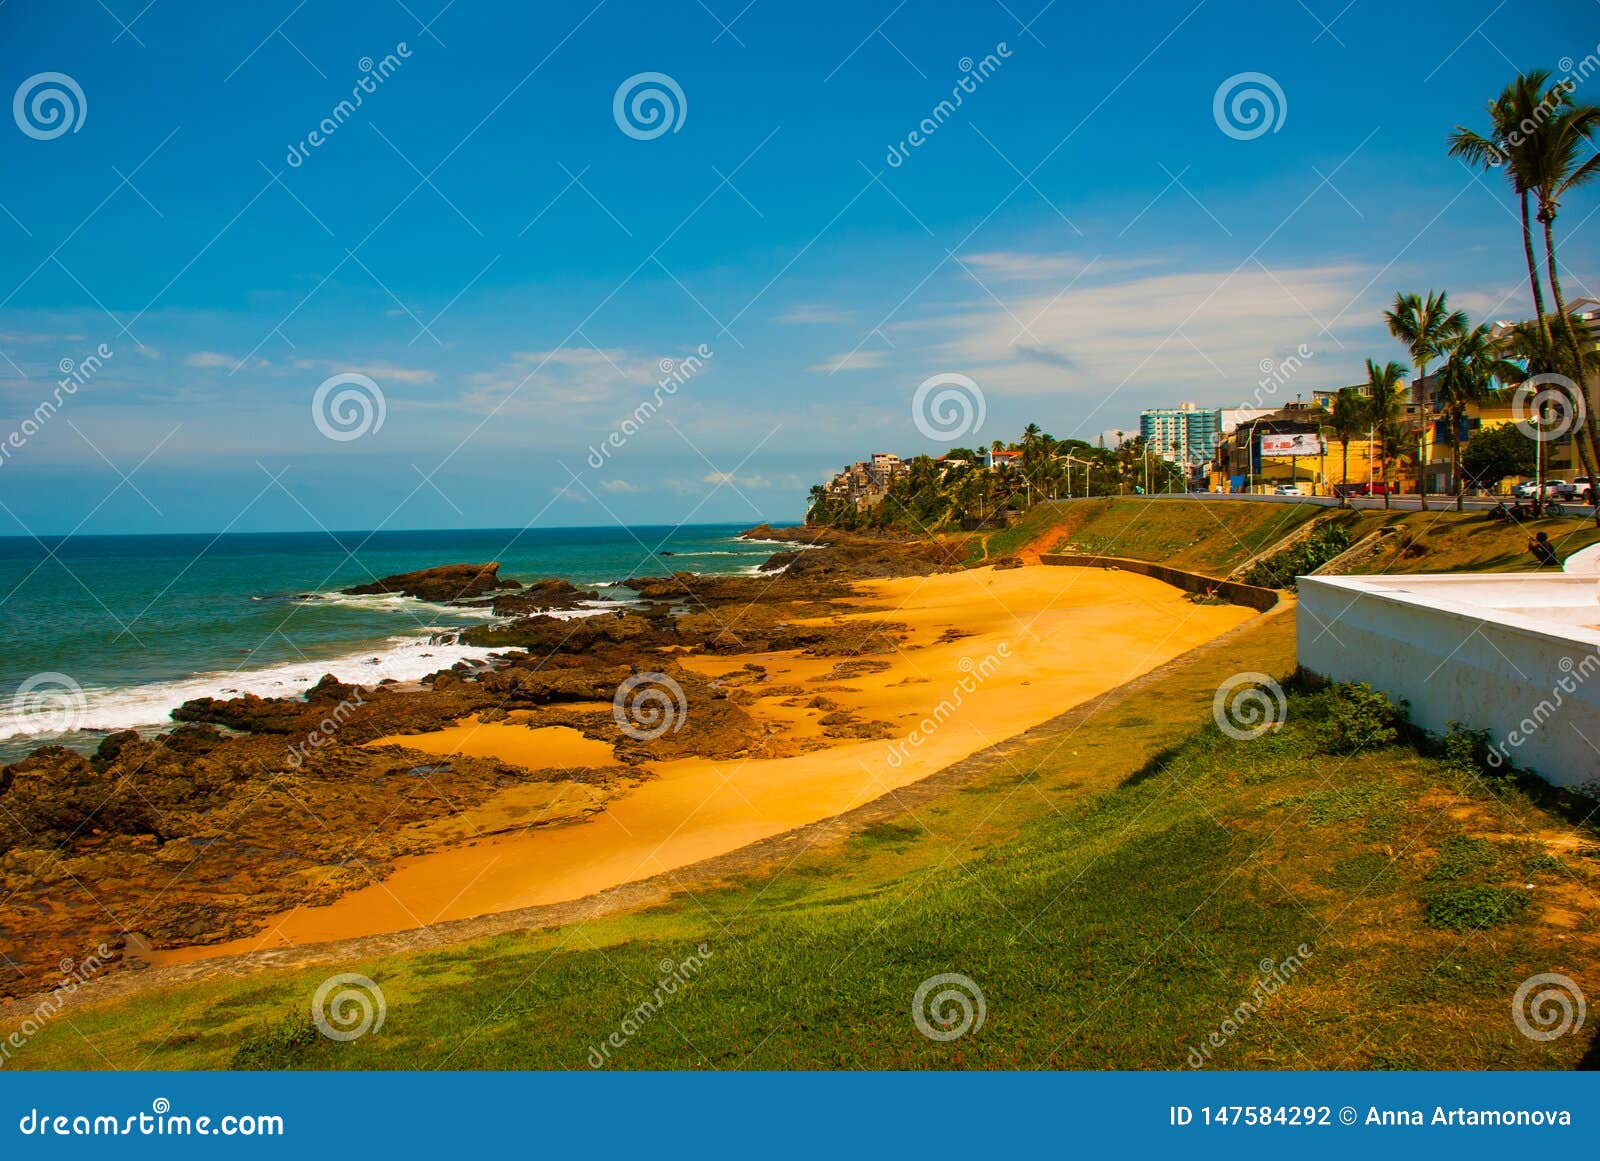 Brazilian beach with yellow sand and blue sea in Sunny weather. Brazil. Salvador. South America. Brazilian beach with yellow sand and blue sea in Sunny weather. Brazil. Sao Salvador da Bahia de Todos os Santos. South America